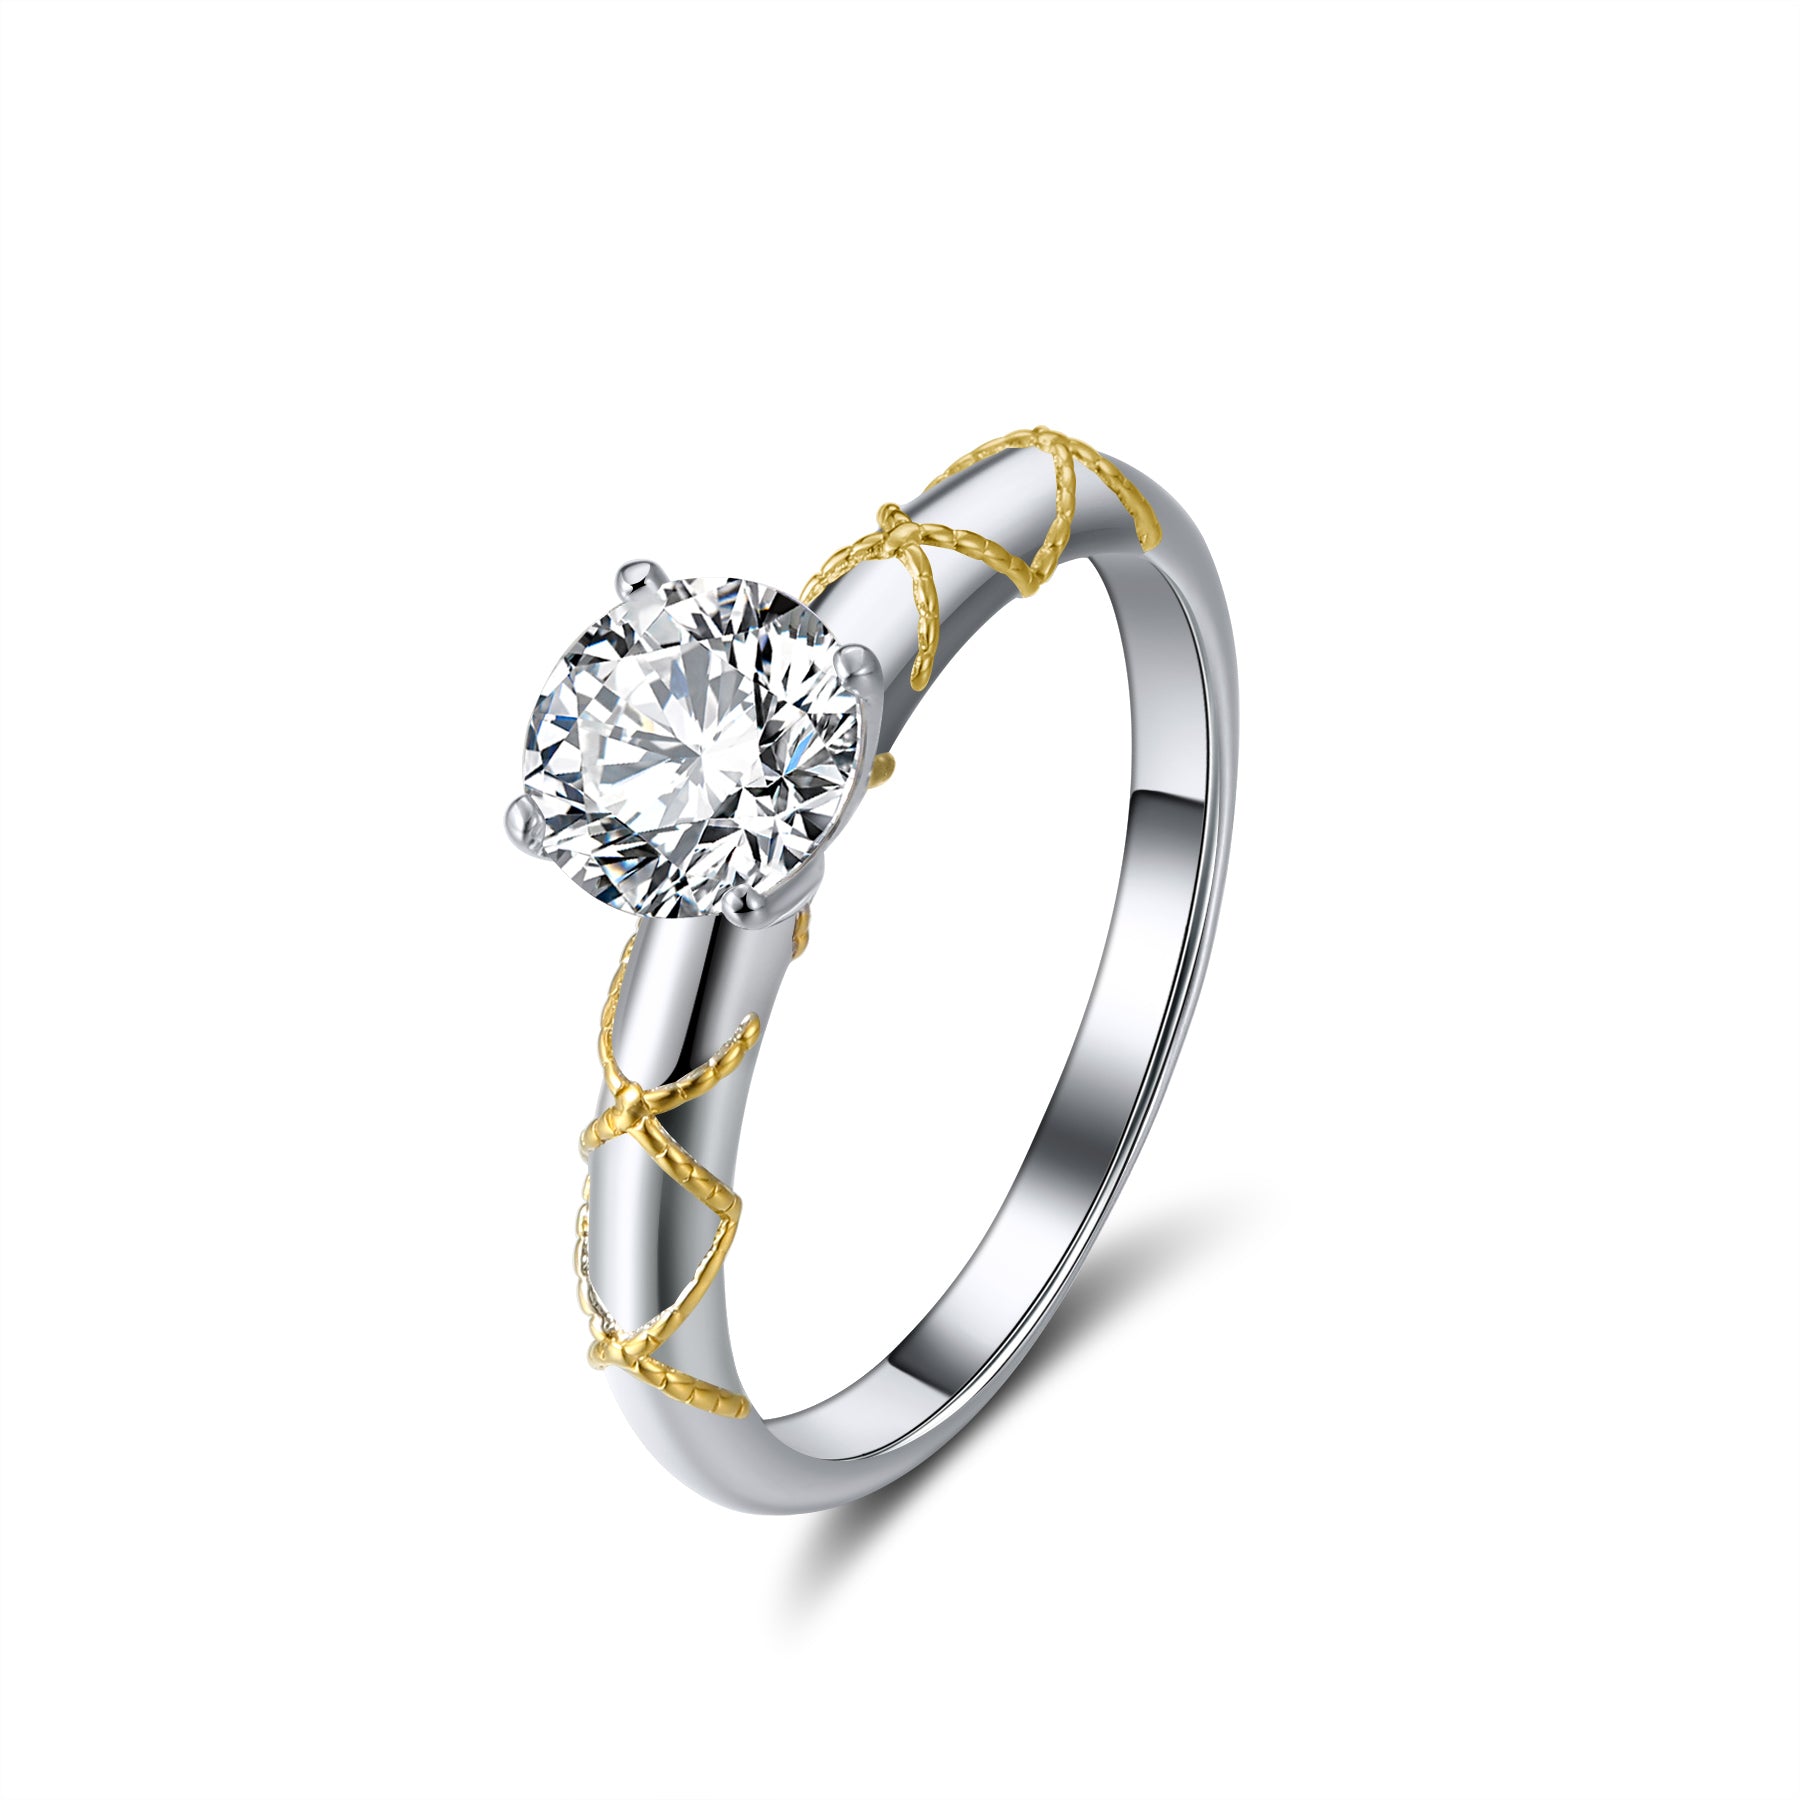 Amore Mia Engagement Ring Women 1 Ct Moissanite Sterling Silver Ginger Lyne Collection - Gold Trim,8